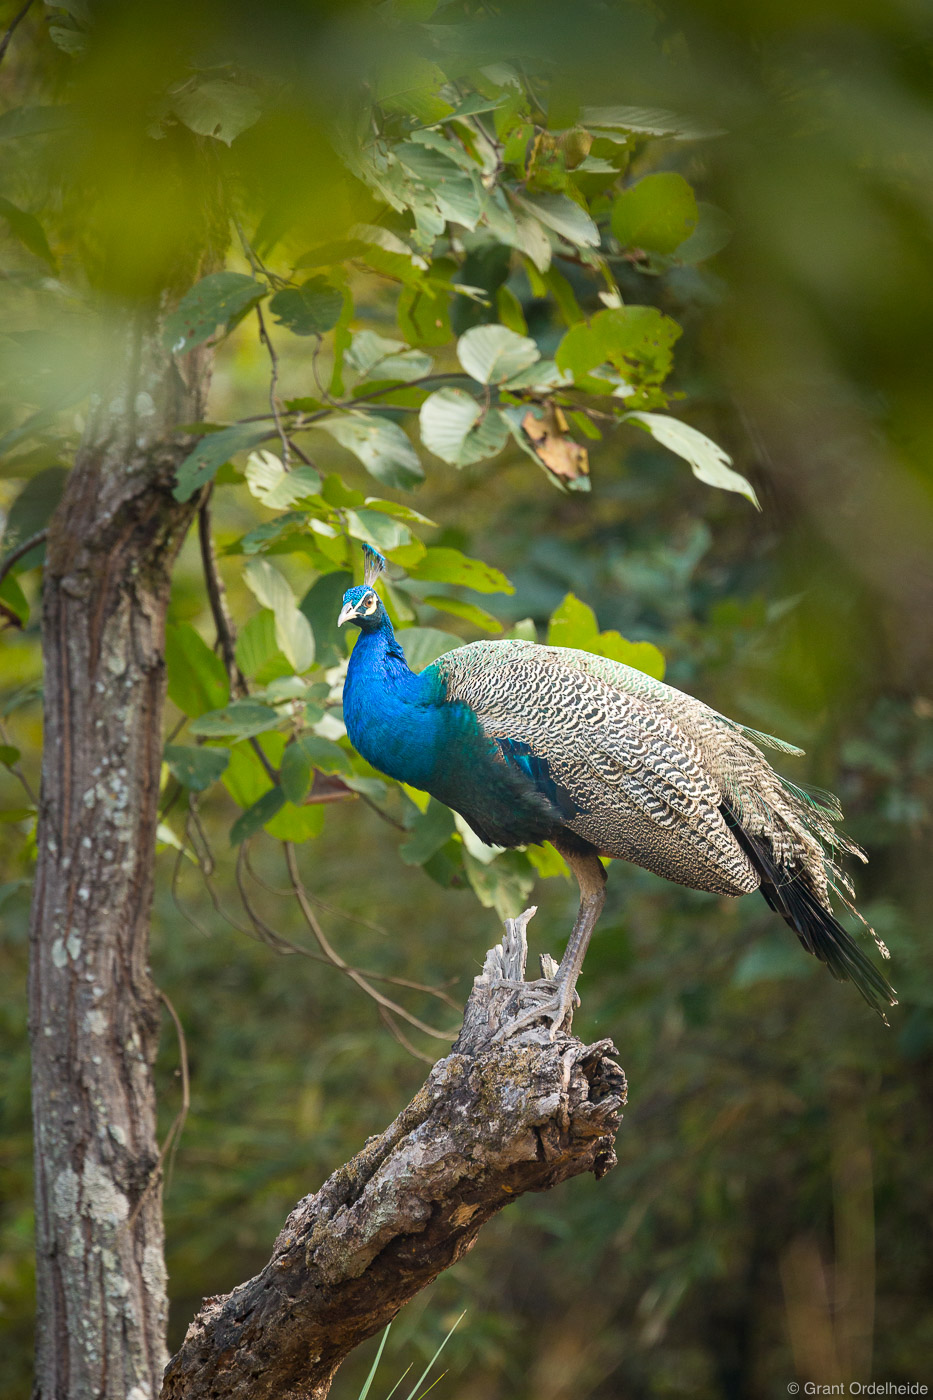 An Indian Peacock sits in a tree deep in Bandhavgarh National Park.